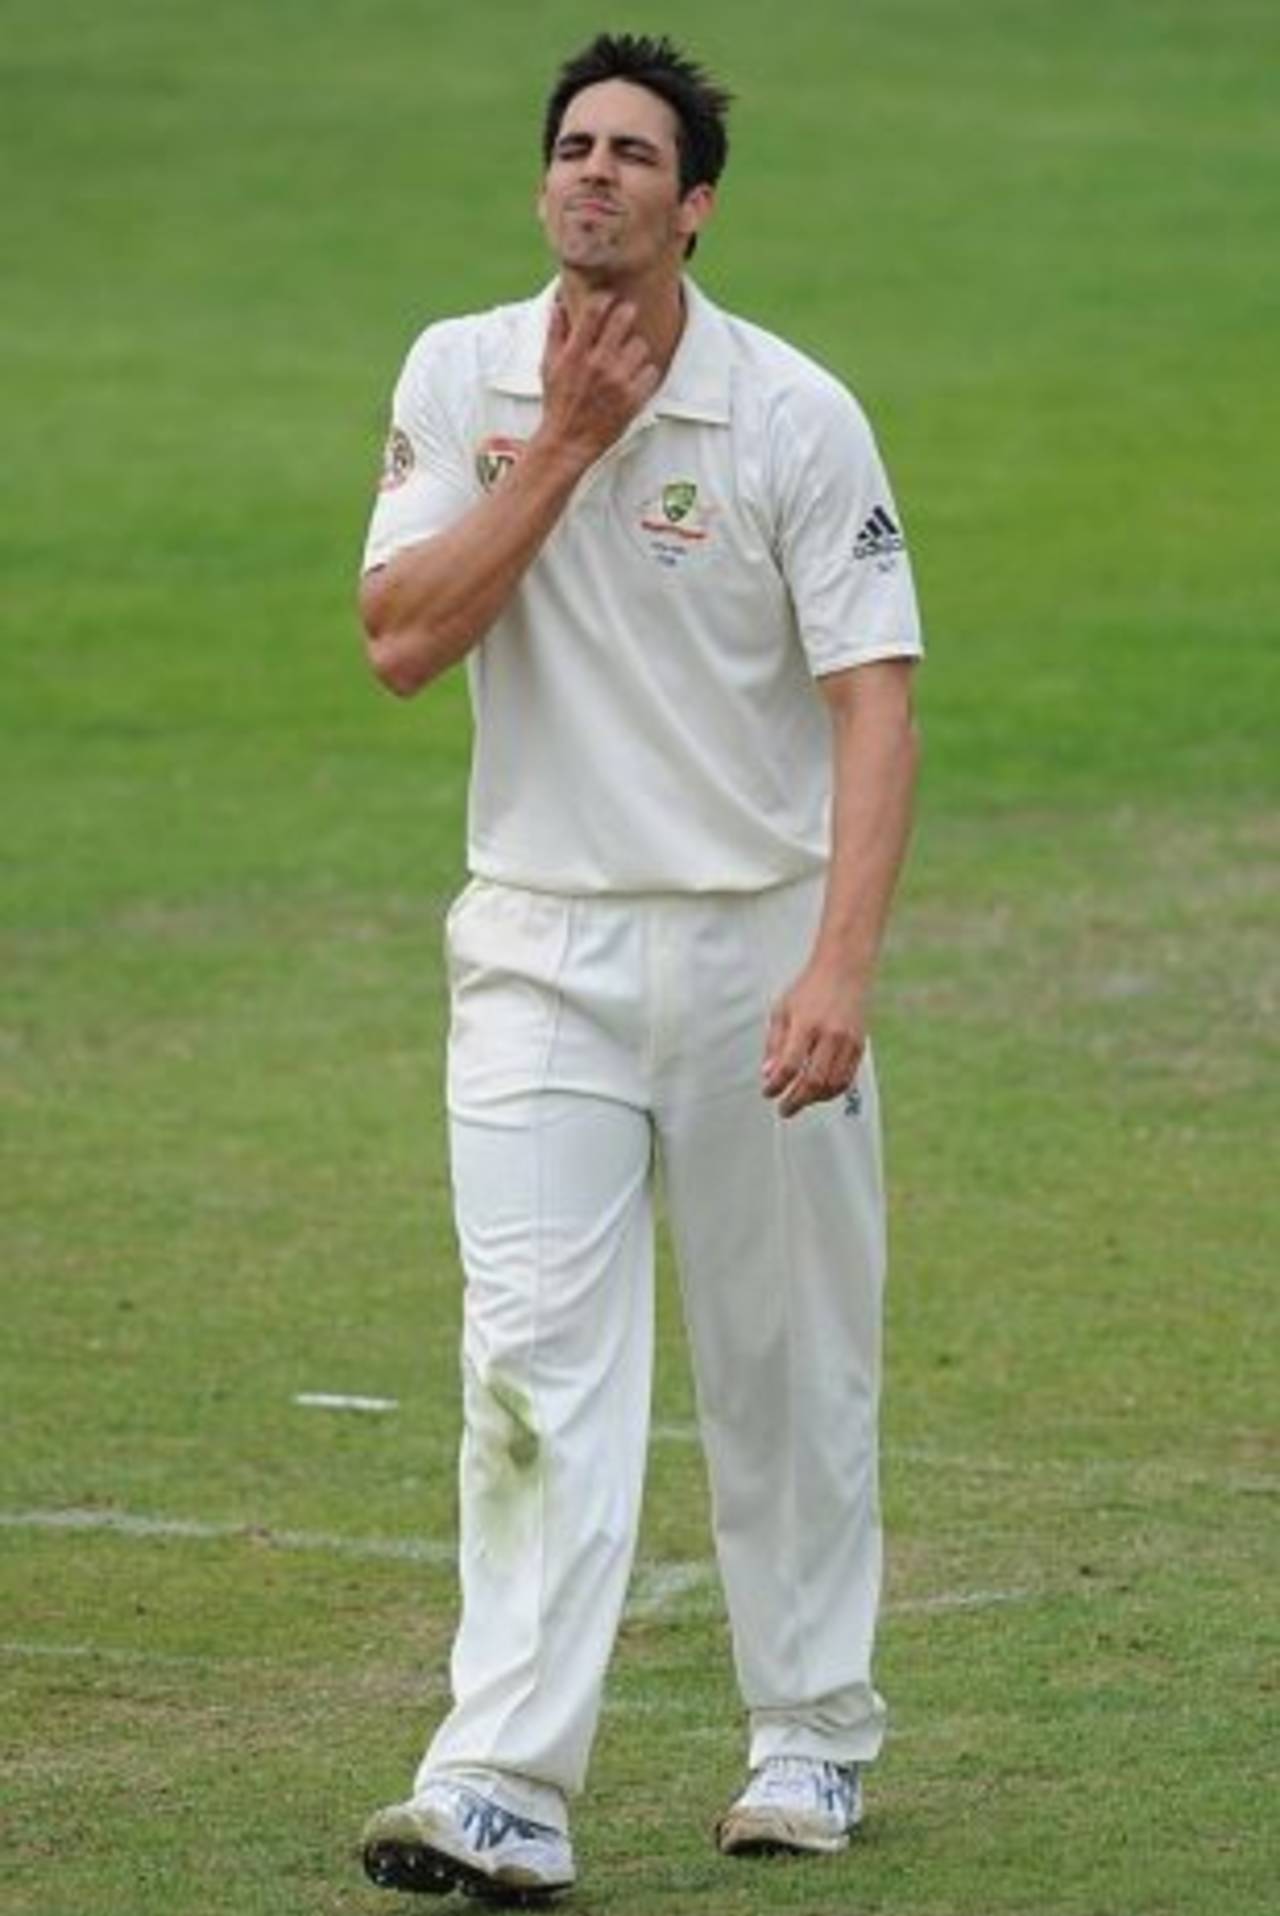 Mitchell Johnson wonders what has gone wrong as his troubles continue, Northamptonshire v Australians, 3rd day, Northampton, July 26, 2009